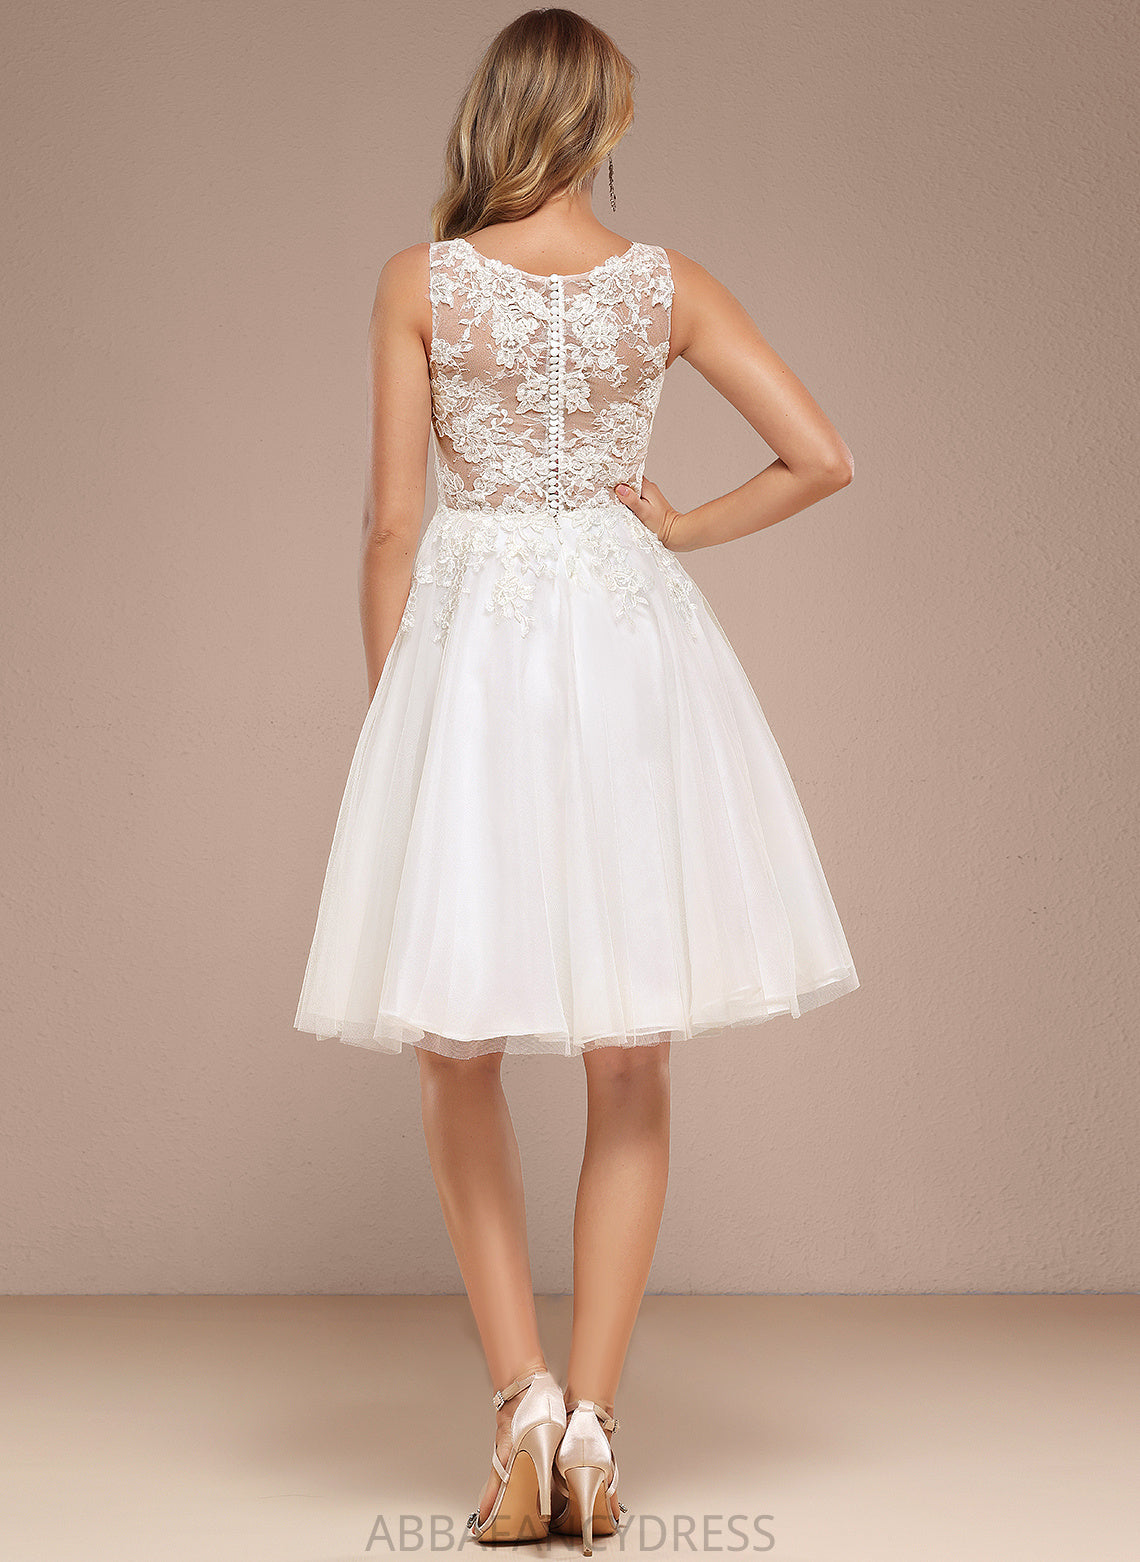 Akira Sequins With Tulle A-Line Wedding Dresses Lace Knee-Length Wedding Dress Neck Boat